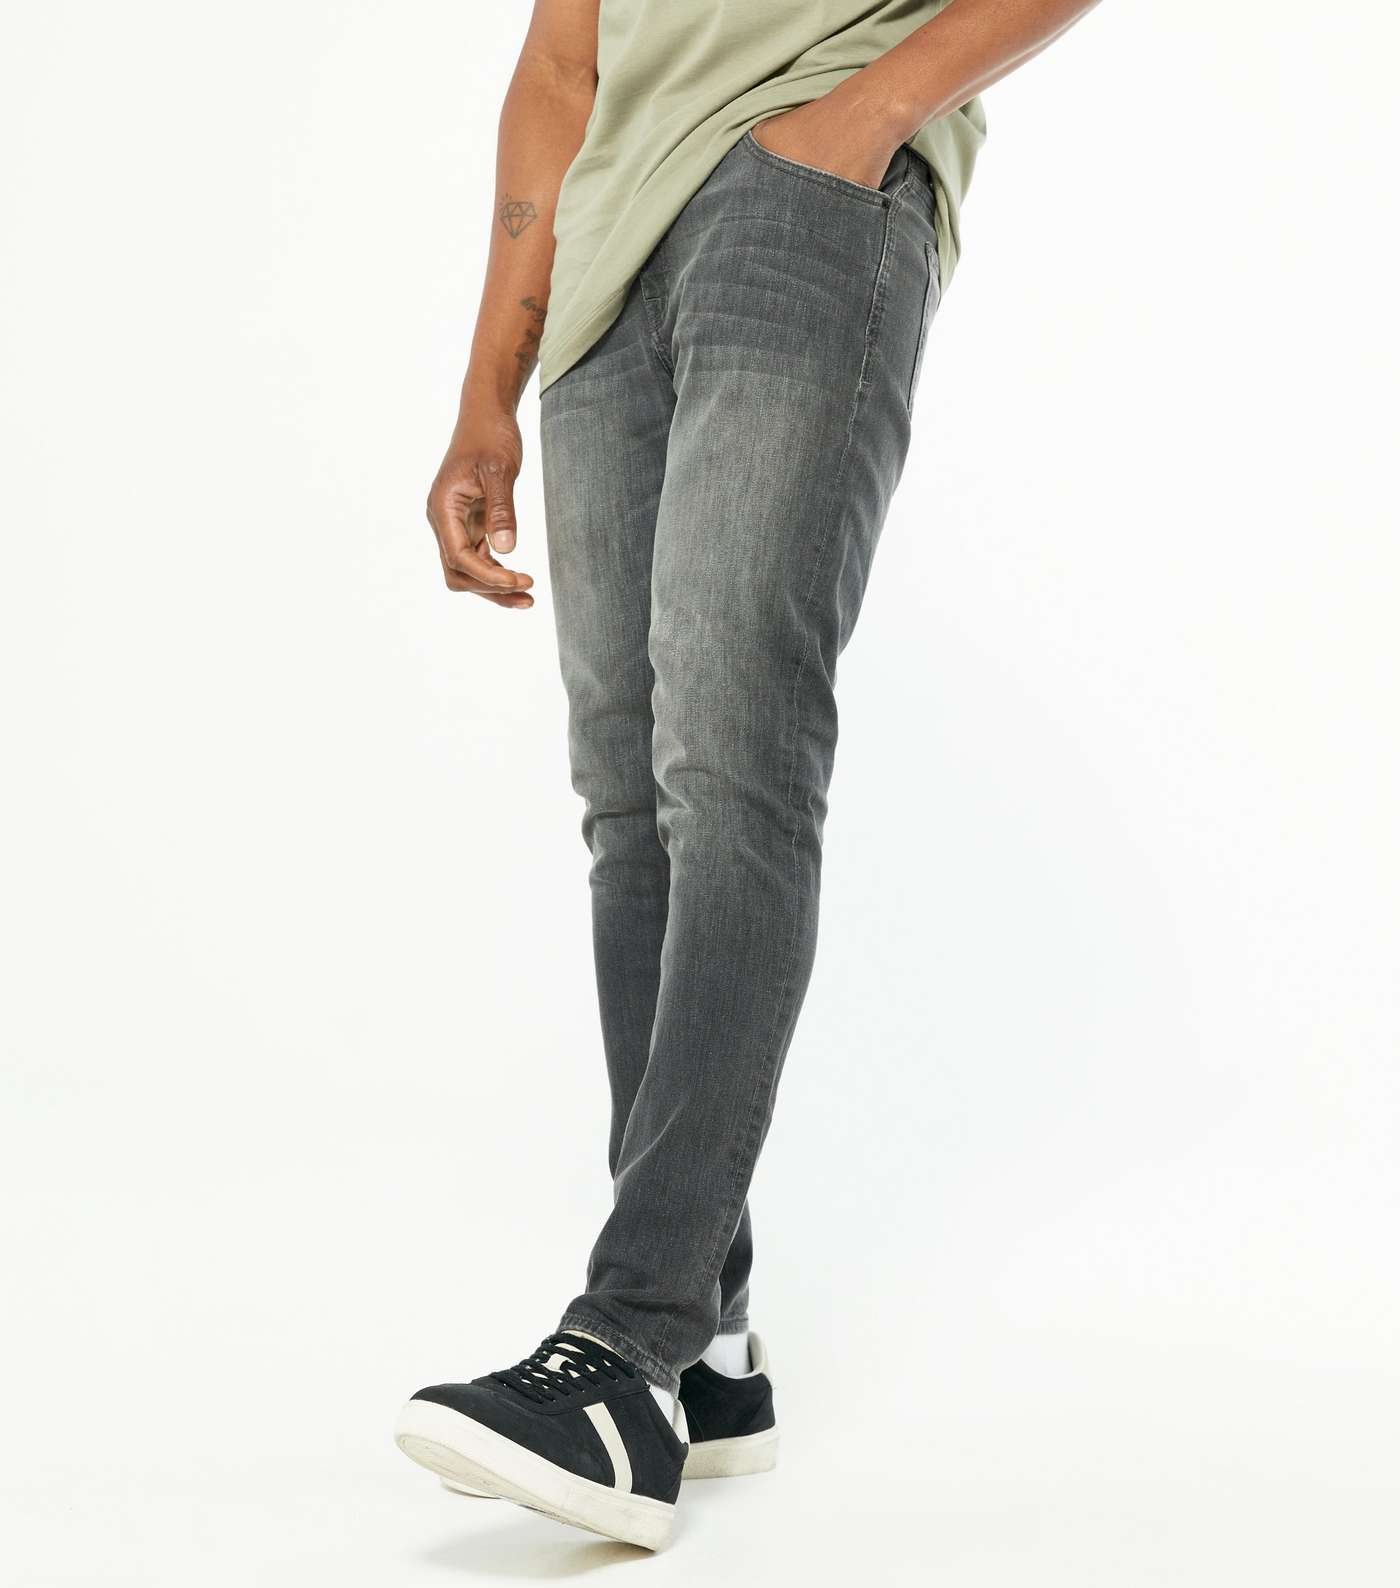 Pale Grey Washed Skinny Stretch Jeans Image 2